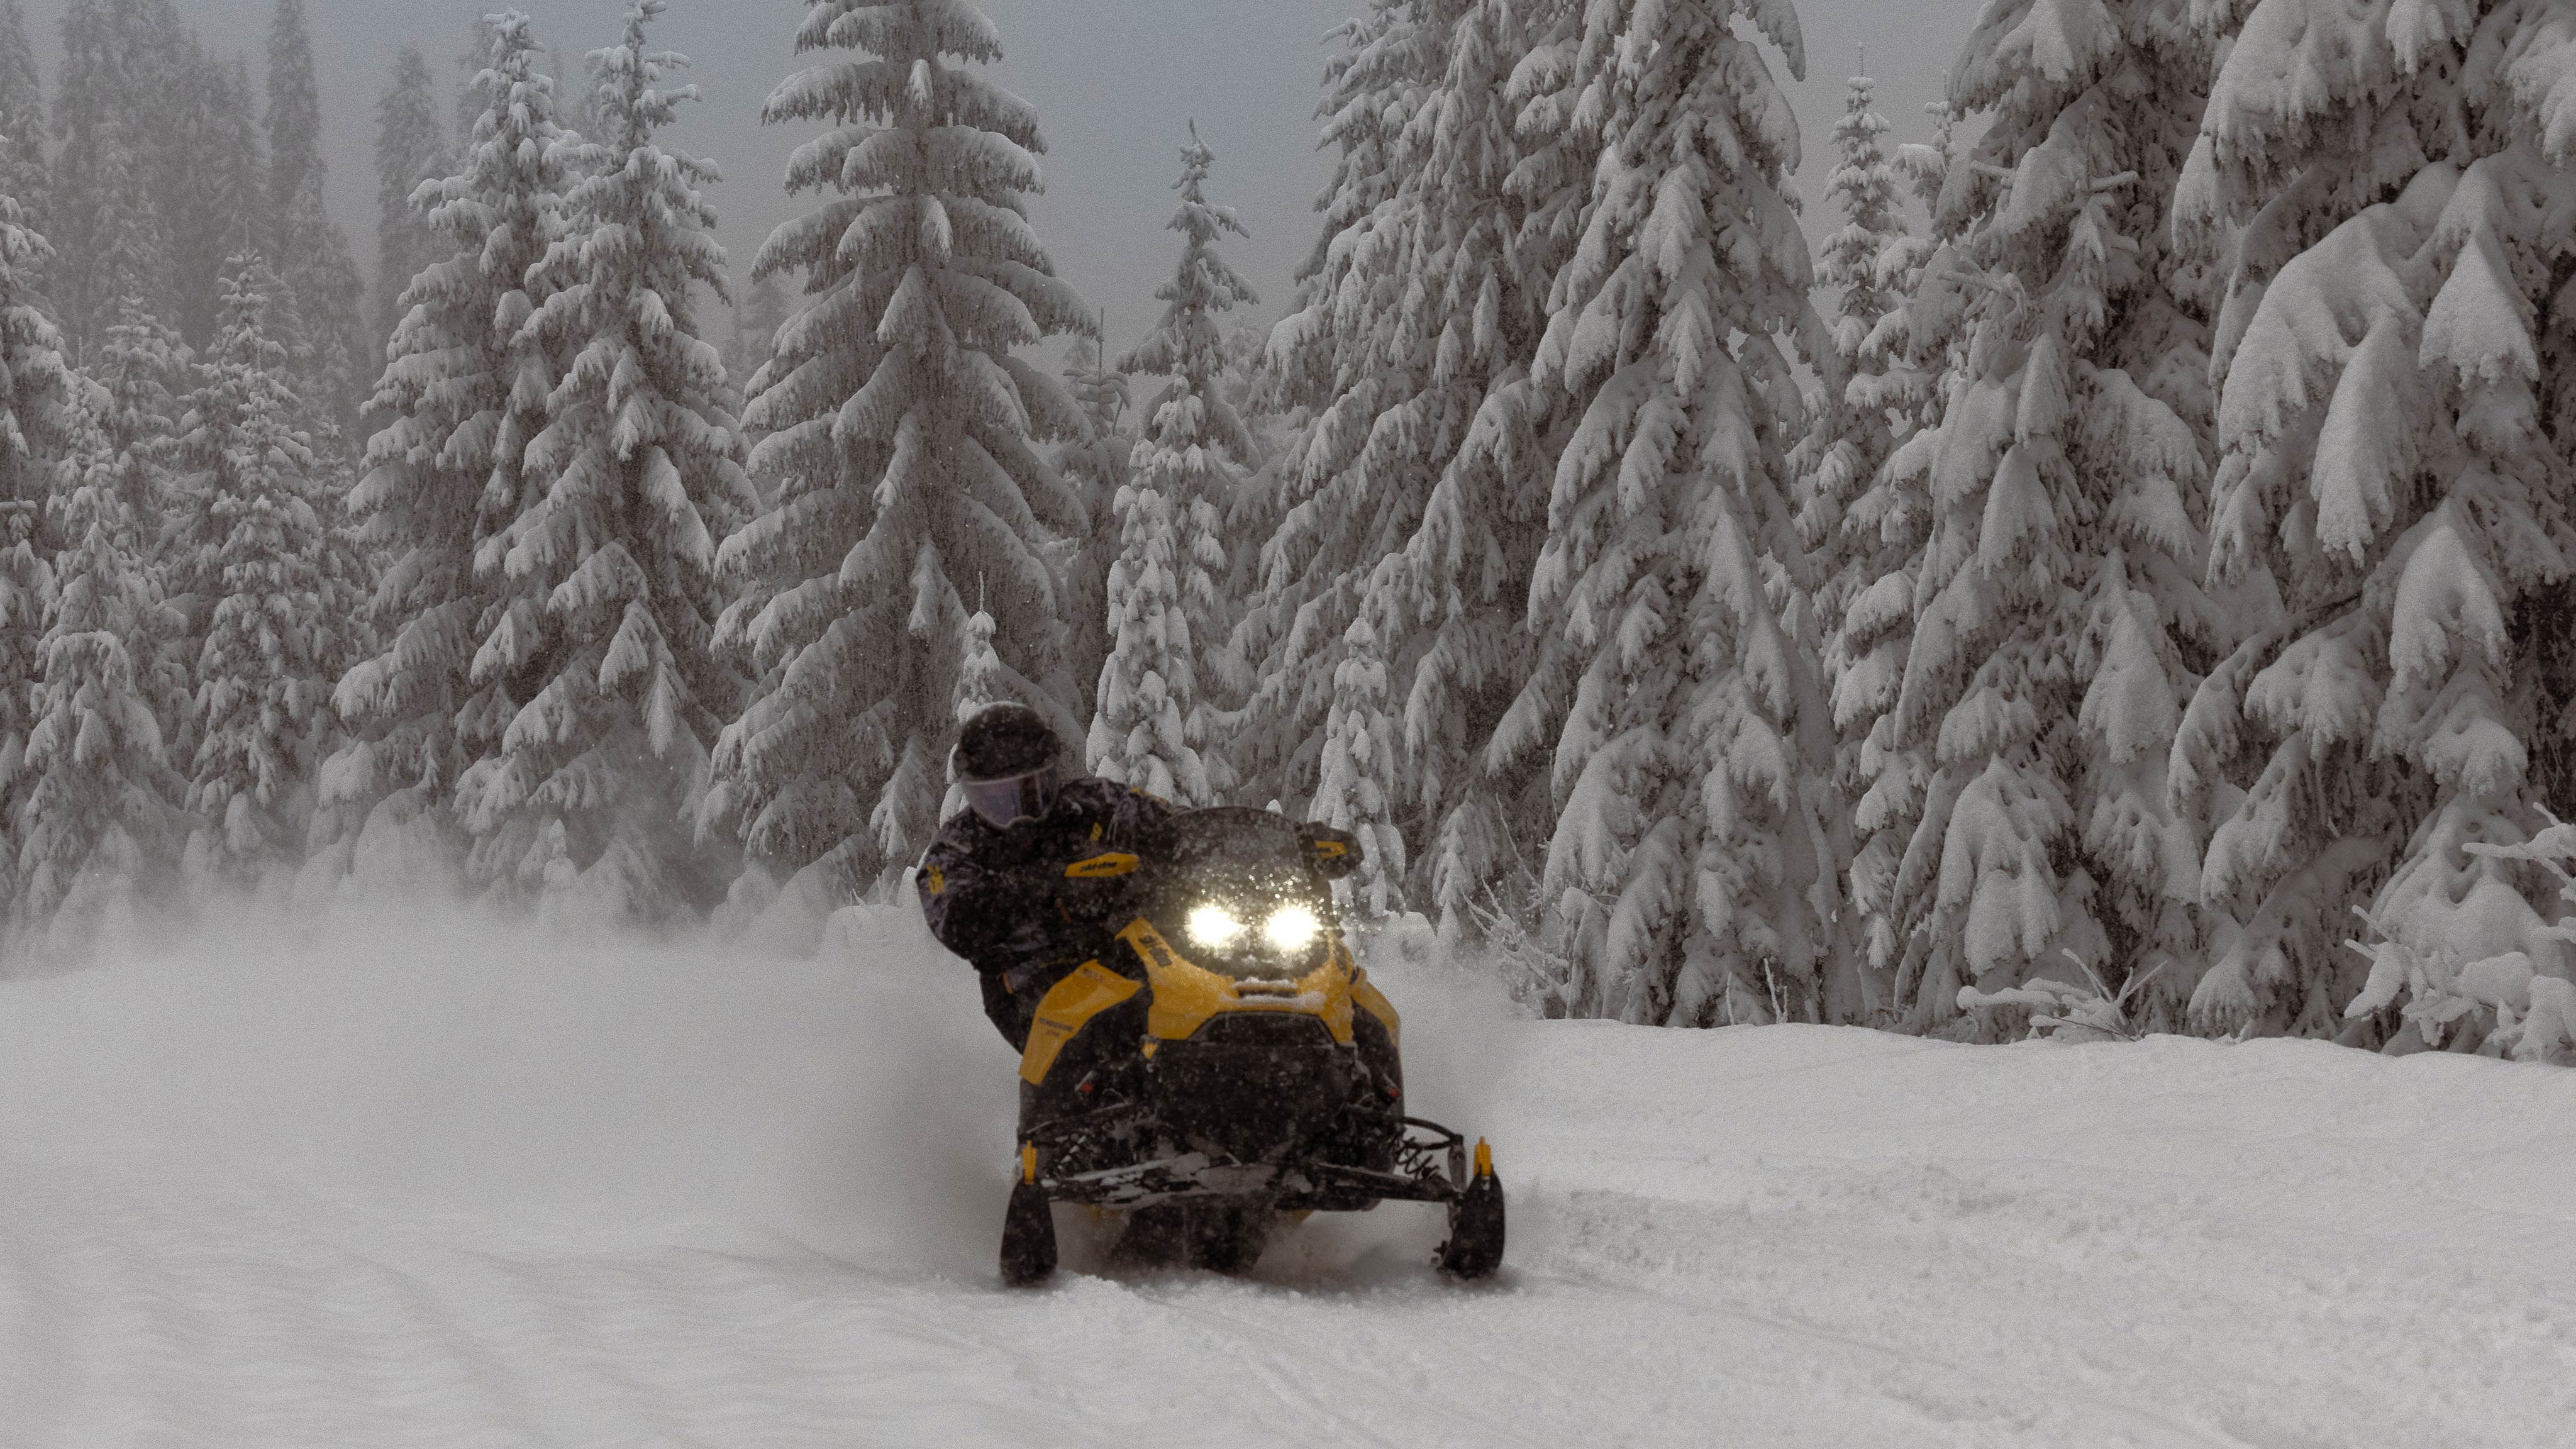 2025 Ski-Doo Renegade trail snowmobile riding in snowy conditions